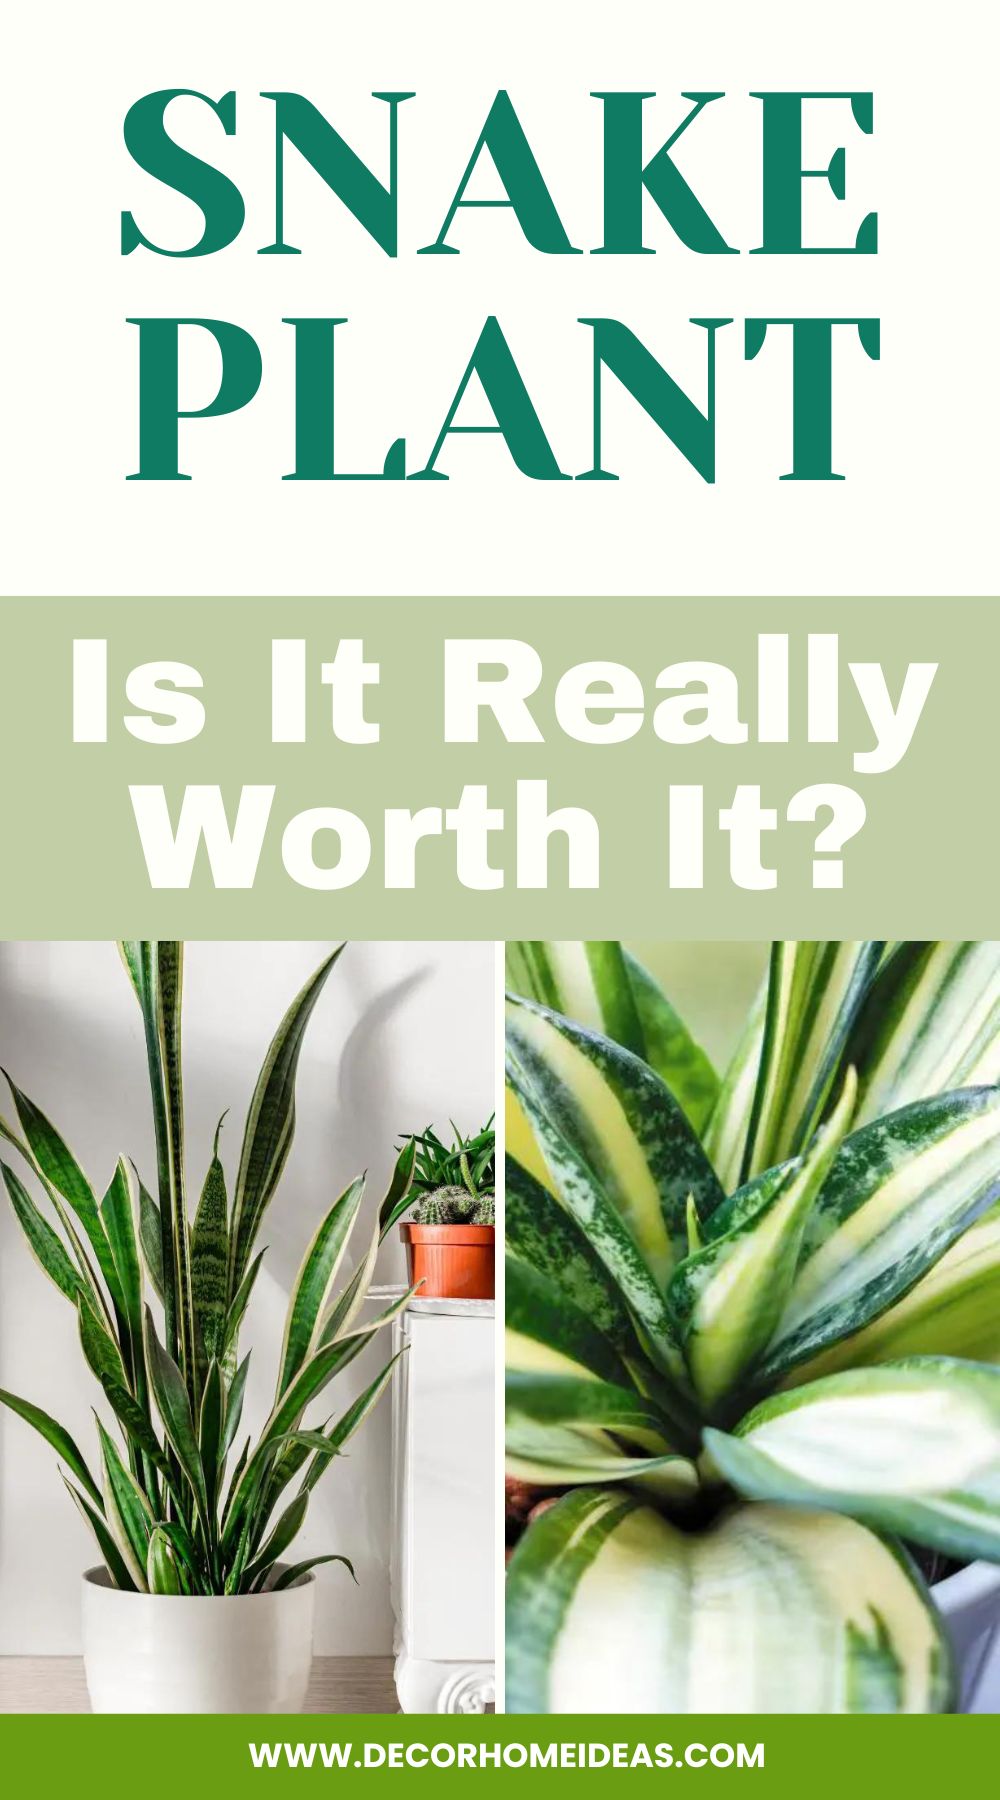 Uncover the potential downsides of snake plants and weigh their advantages against their disadvantages to determine if they are truly worth it for your indoor space. Explore common concerns such as overwatering, pet toxicity, and limited aesthetic variety, helping you make an informed decision about incorporating snake plants into your home decor.